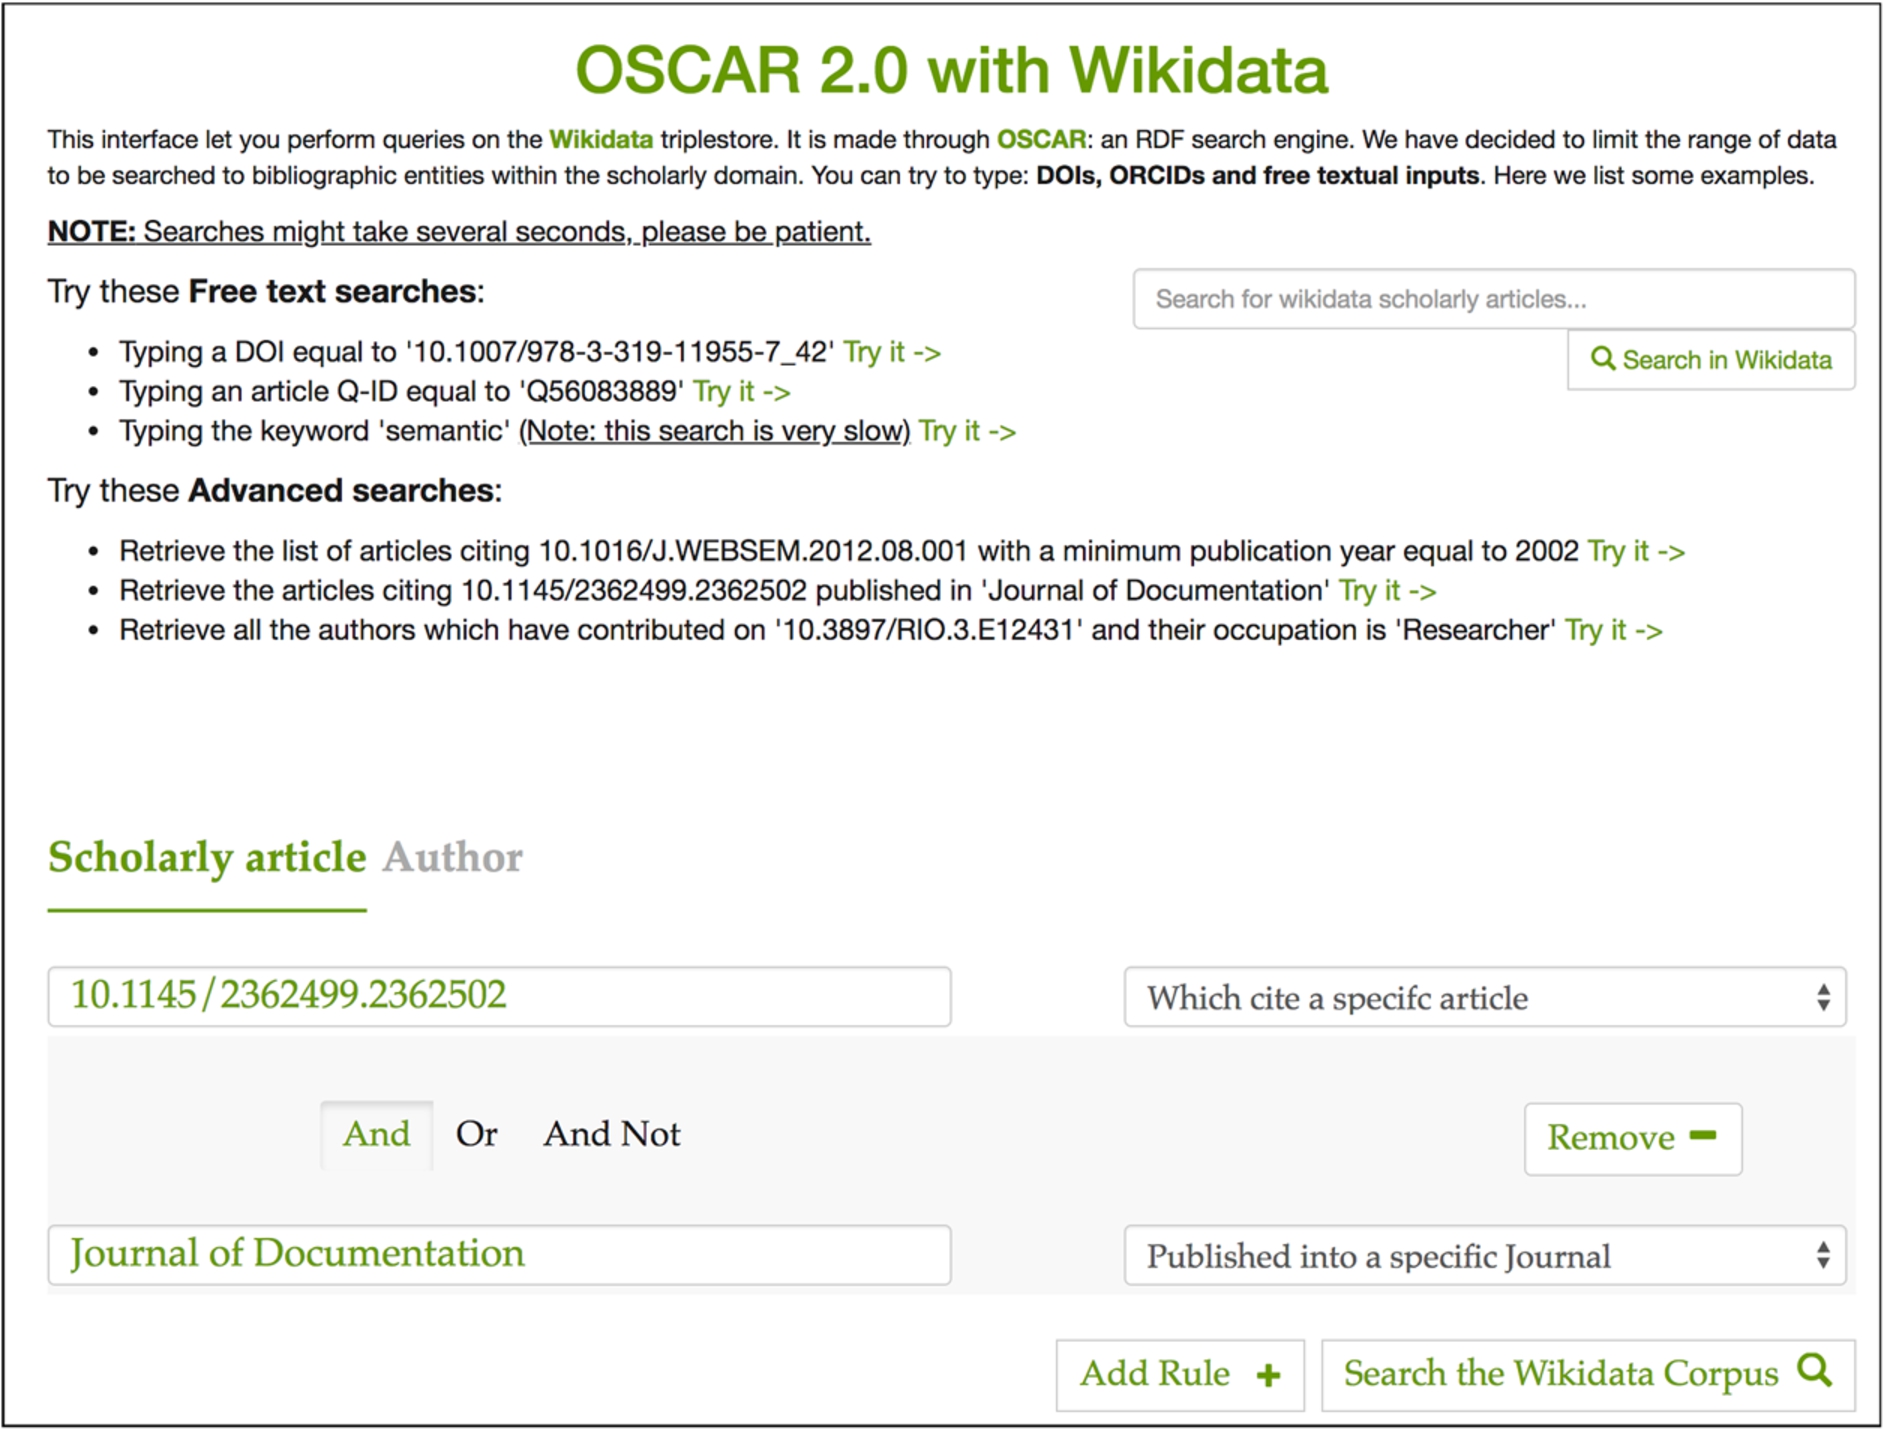 The OSCAR interface for querying the Wikidata scholarly documents. On the top right of the page we have an input box for free-text search, while on the bottom we have a section dedicated to advanced search. The constructed query retrieves all the articlesciting “10.1145/2362499.2362502” published in “Journal of Documentation”.